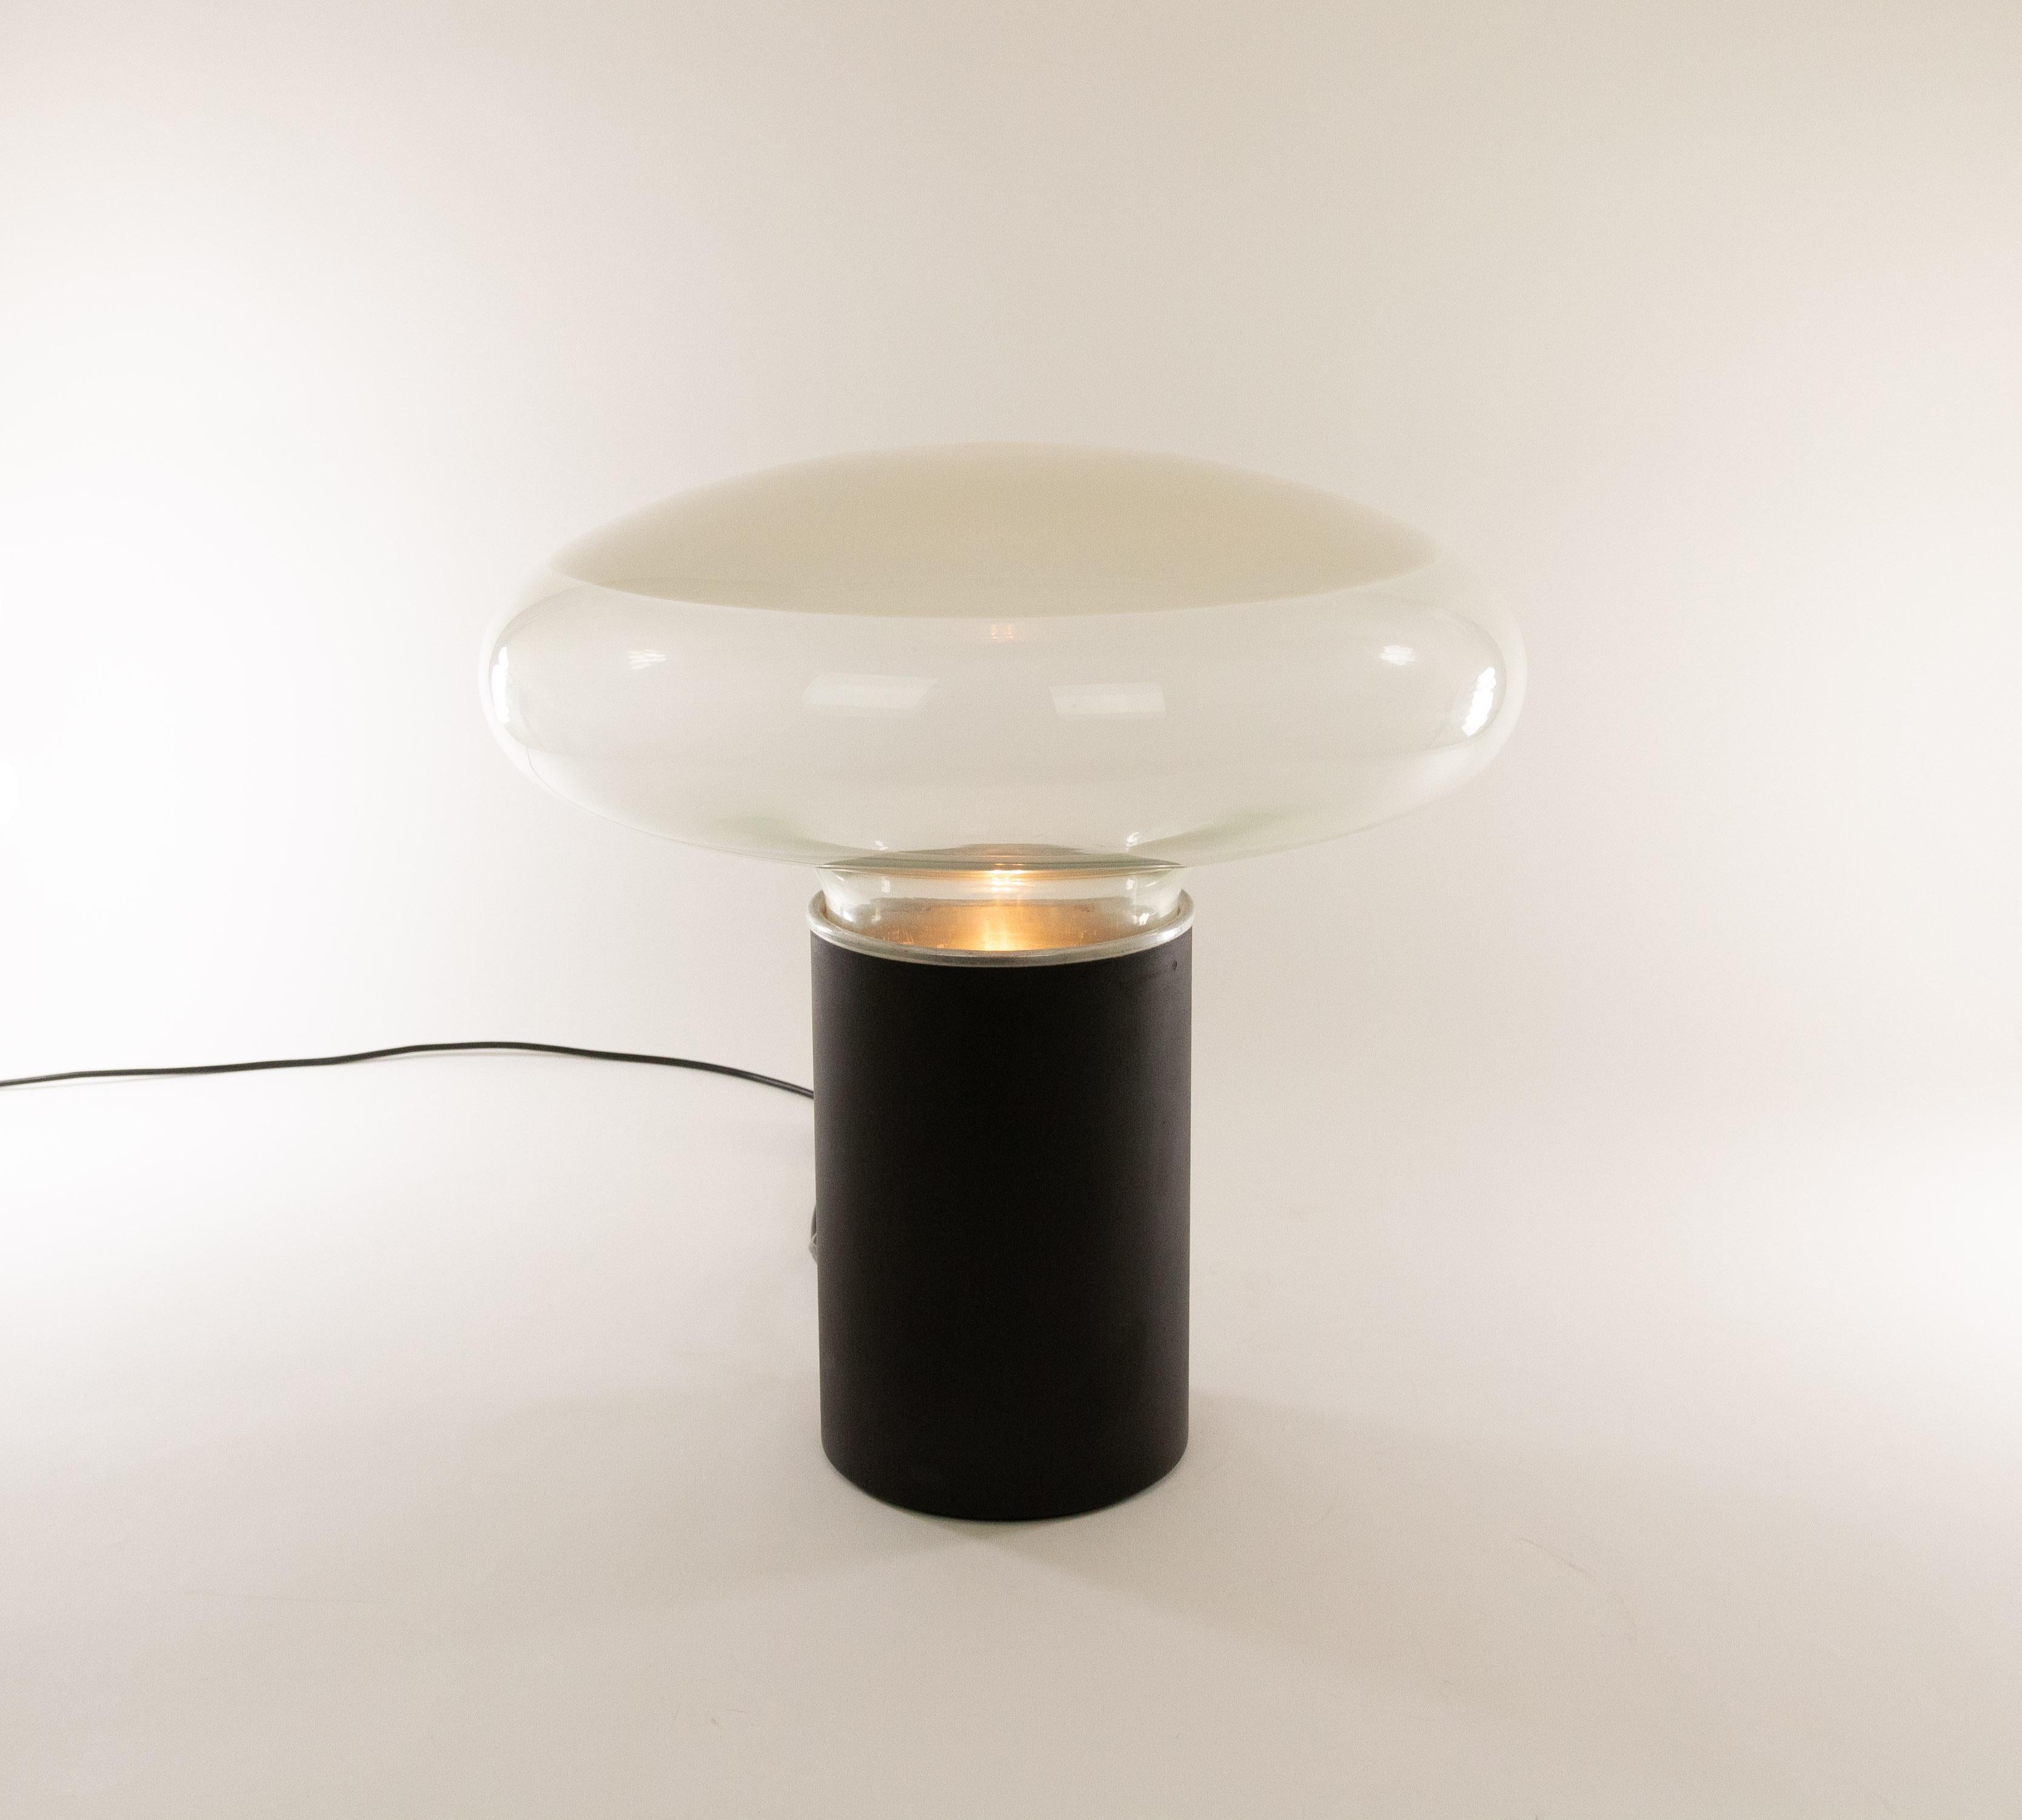 Gill table lamp designed by Roberto Pamio for Leucos in the 1960s.

The lamp consists of two main parts; the metal cylinder shaped base and a diffuser in glass that is partly transparant and partly white. The diffuser sits on an internal metal